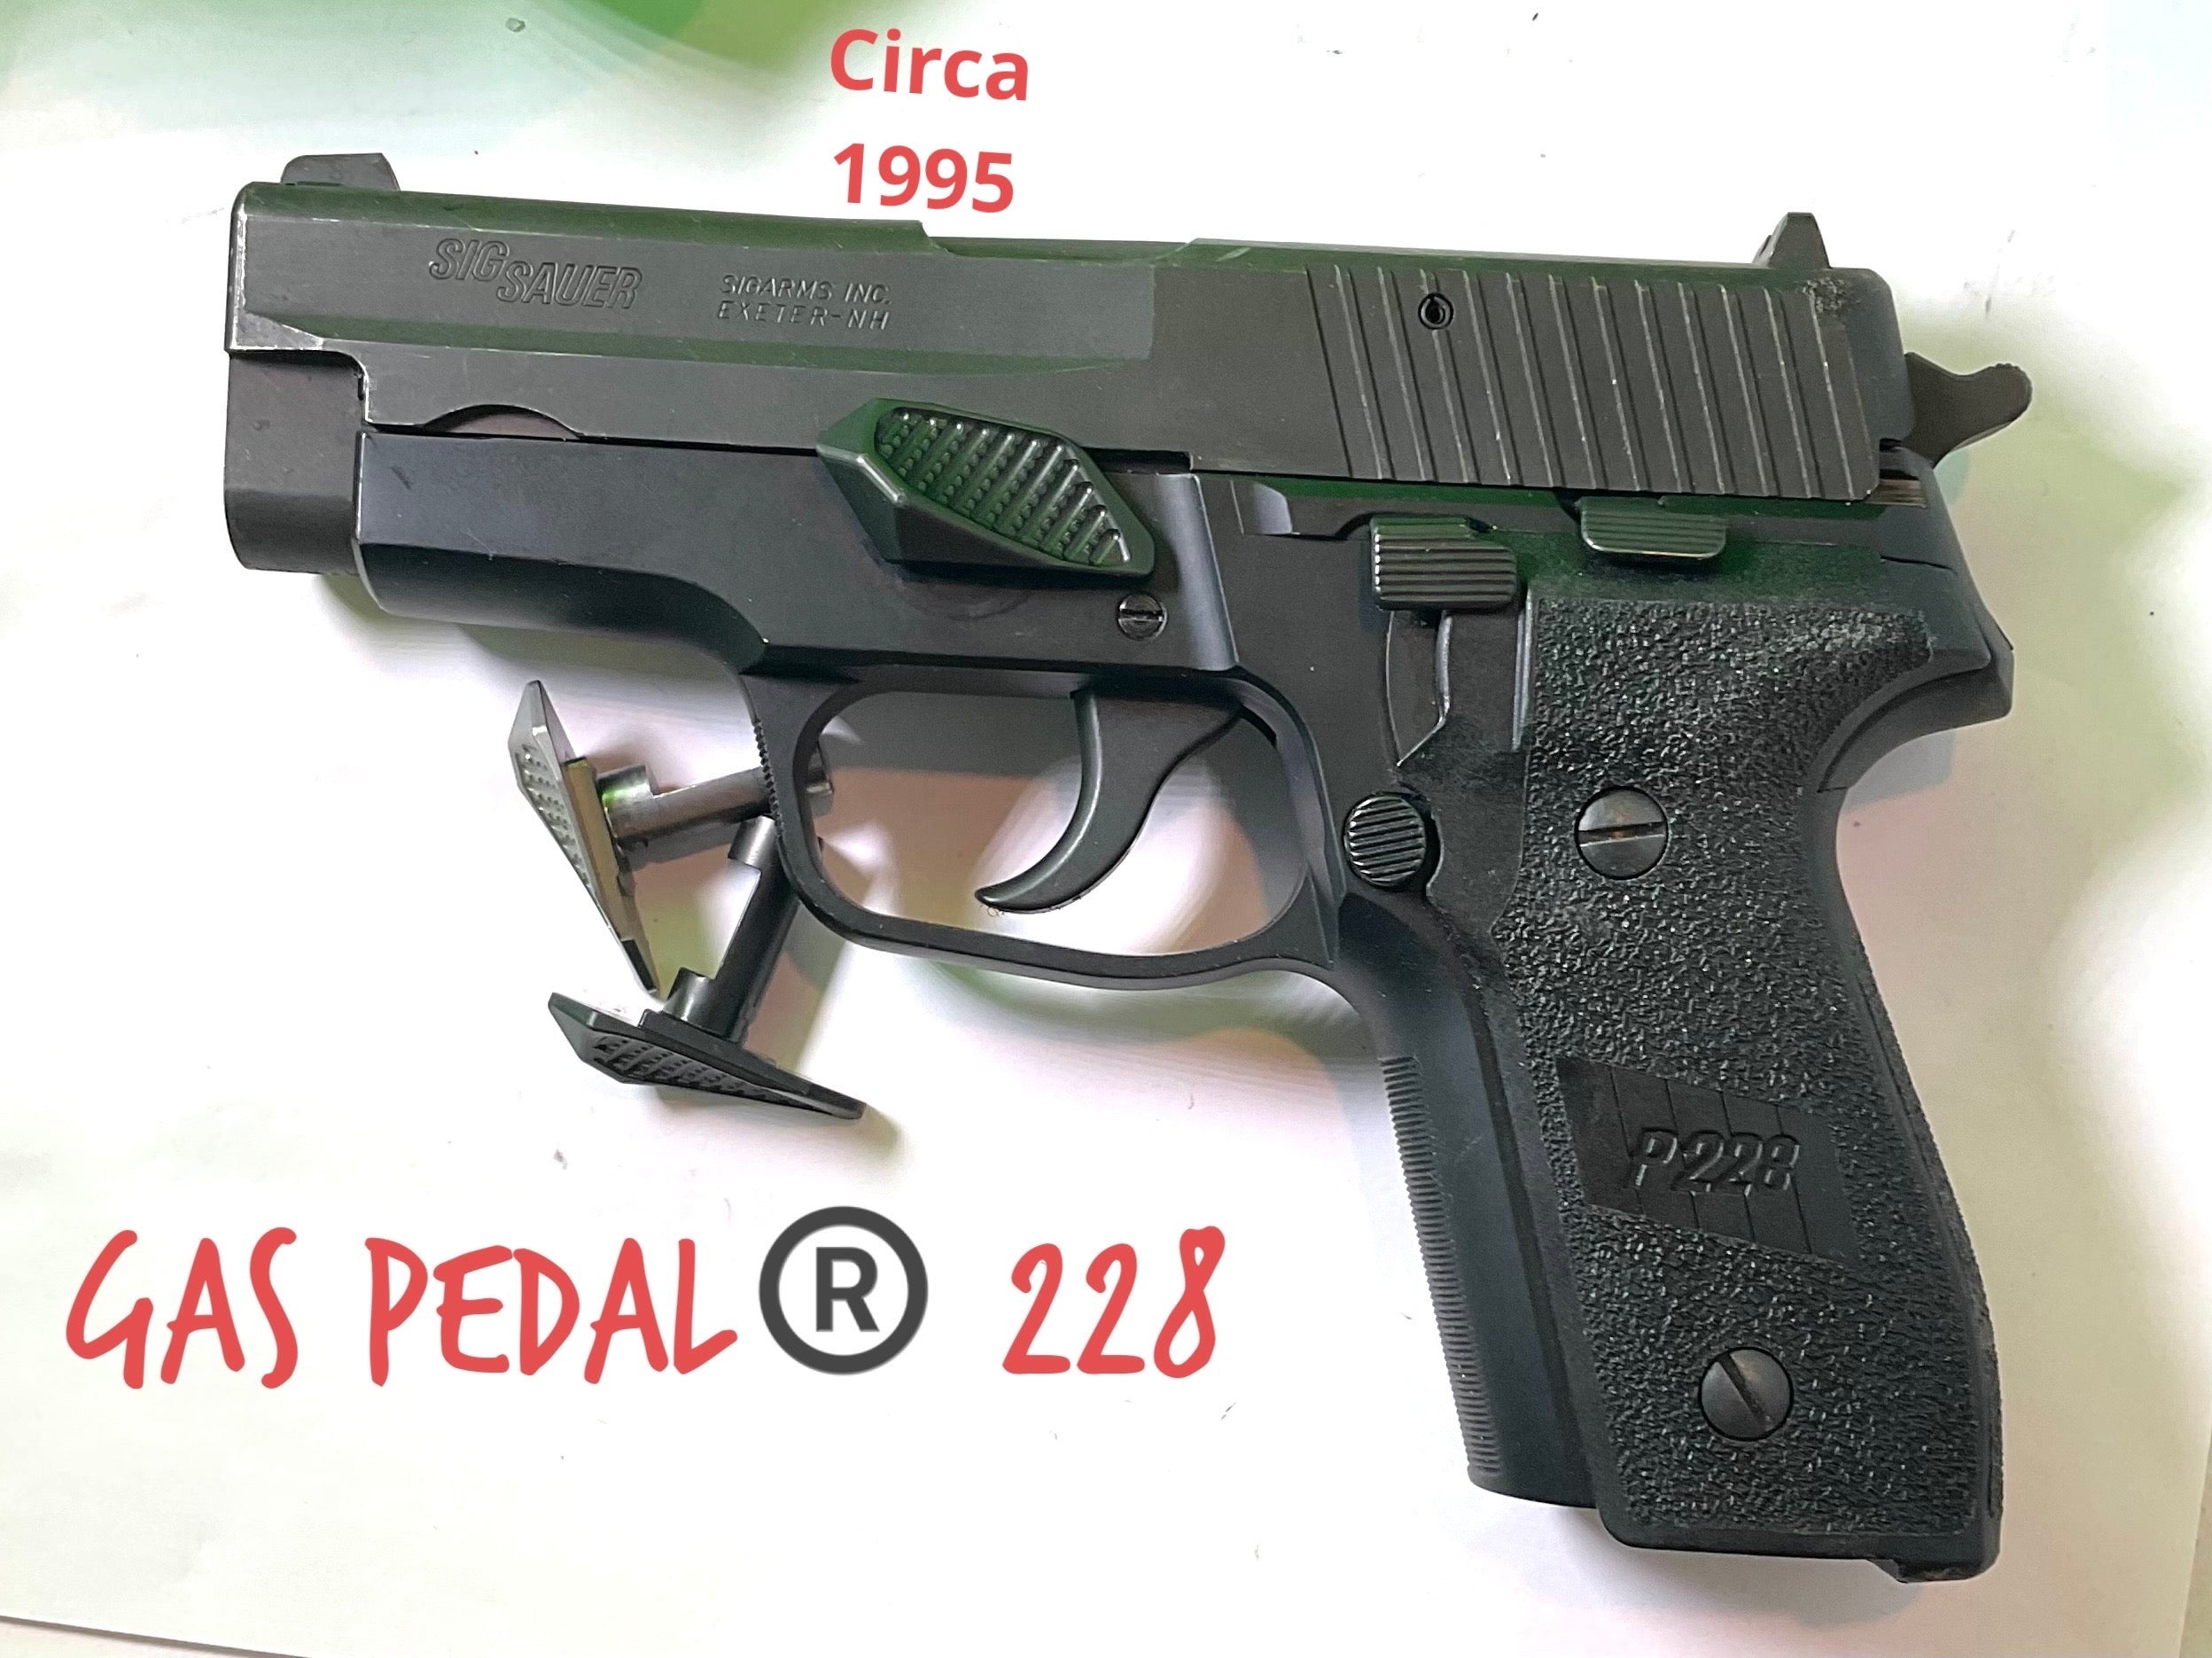 Gas Pedal ® assist mounted on Sig Sauer 228, Legacy from 1995